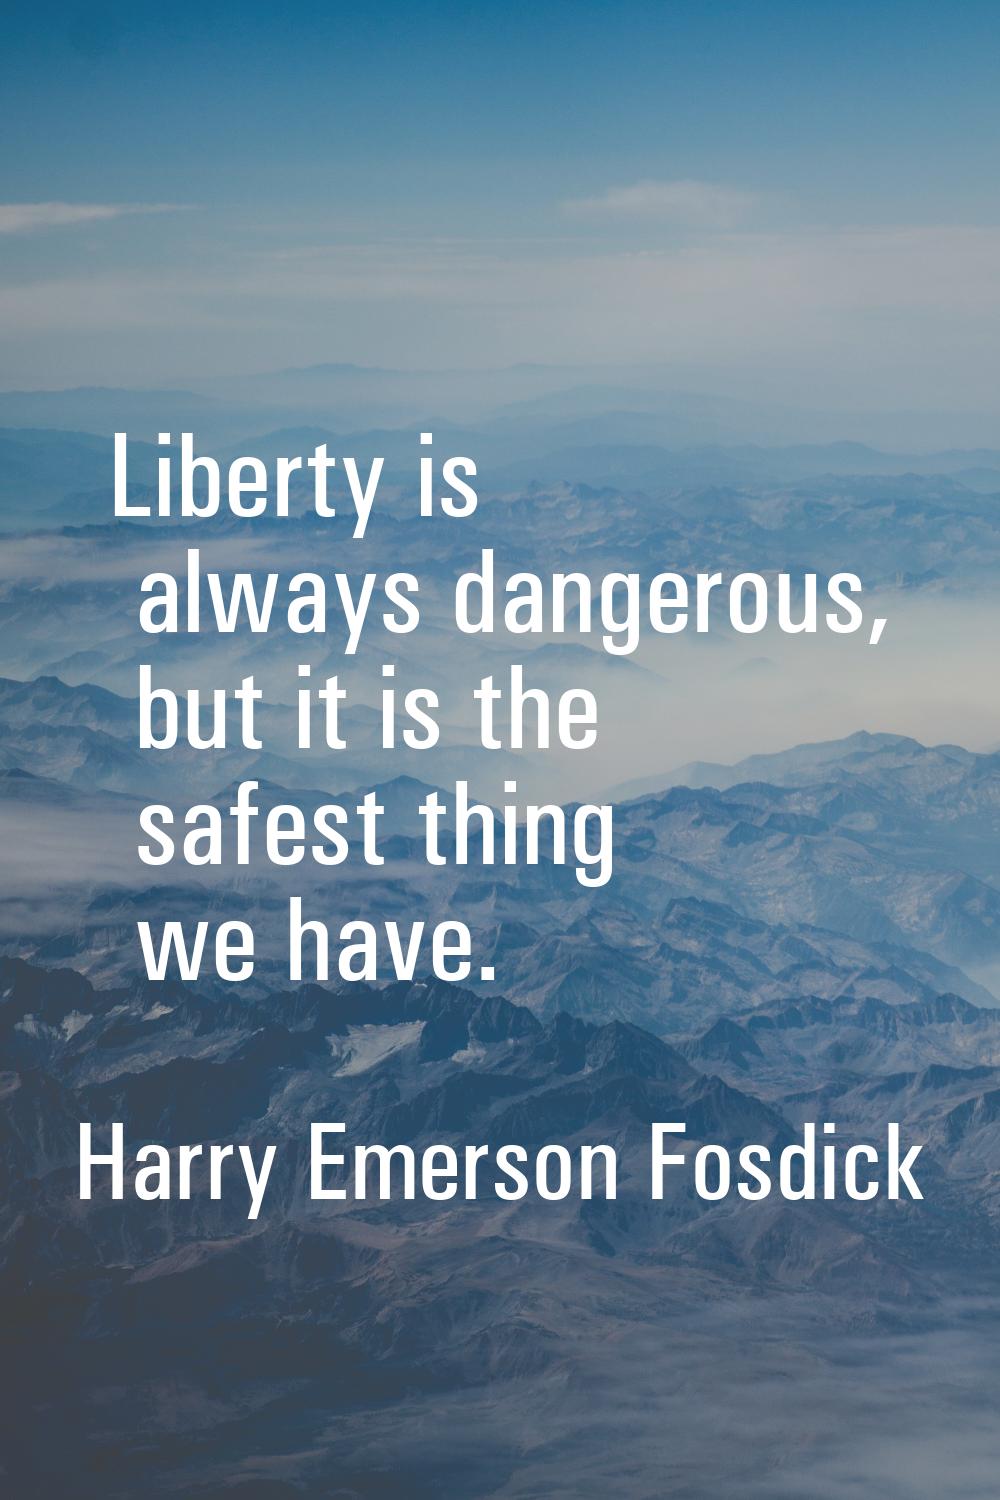 Liberty is always dangerous, but it is the safest thing we have.